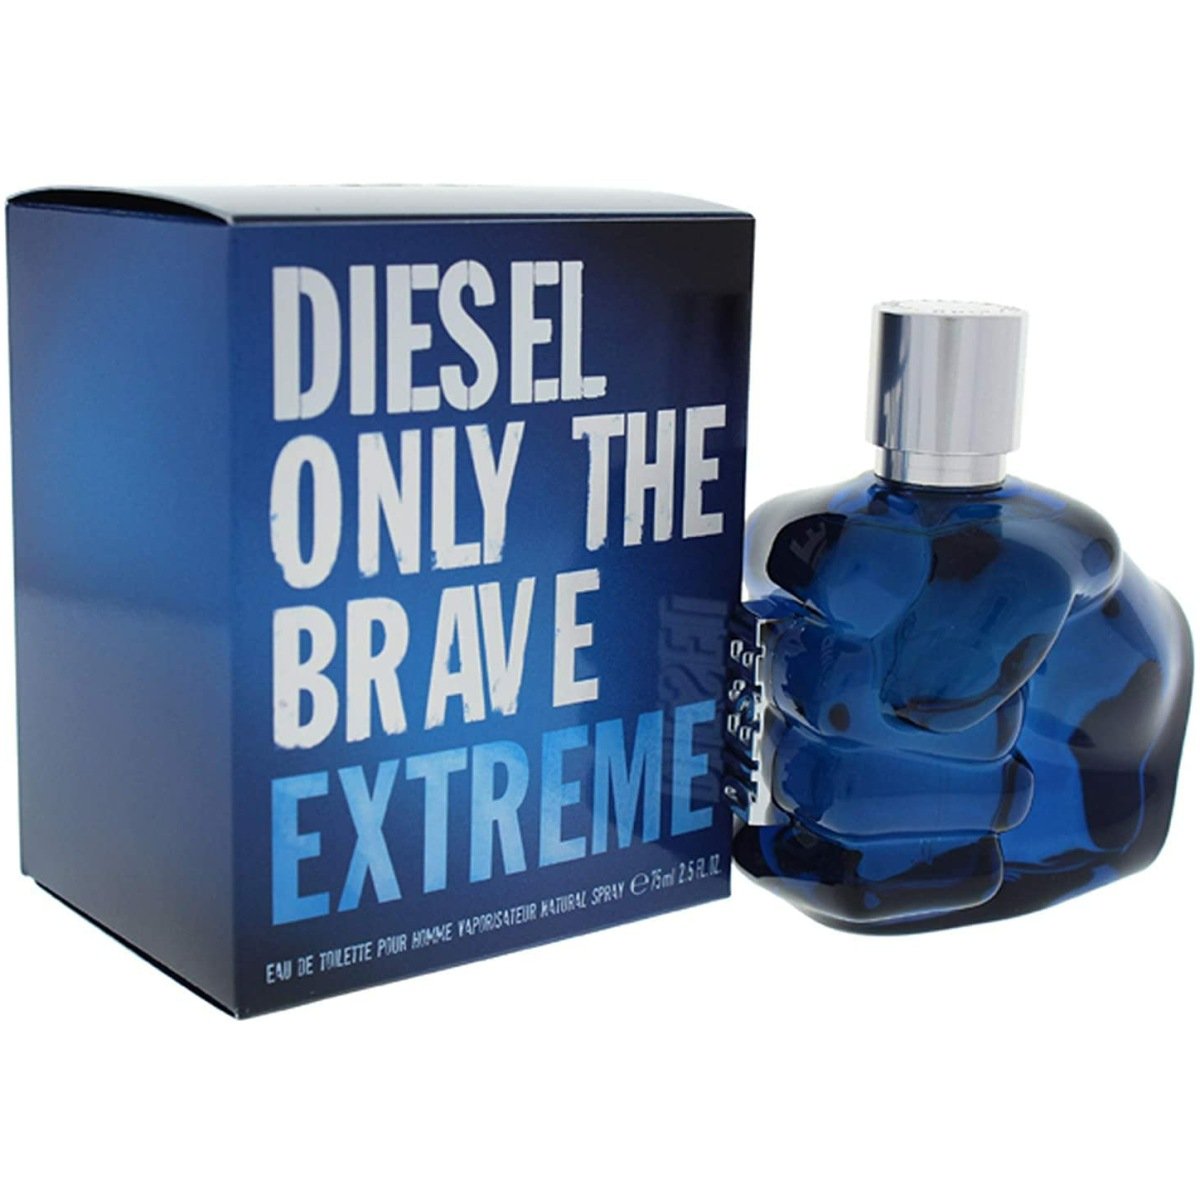 Diesel Only The Brave Extreme EDT Perfume For Men 75ml